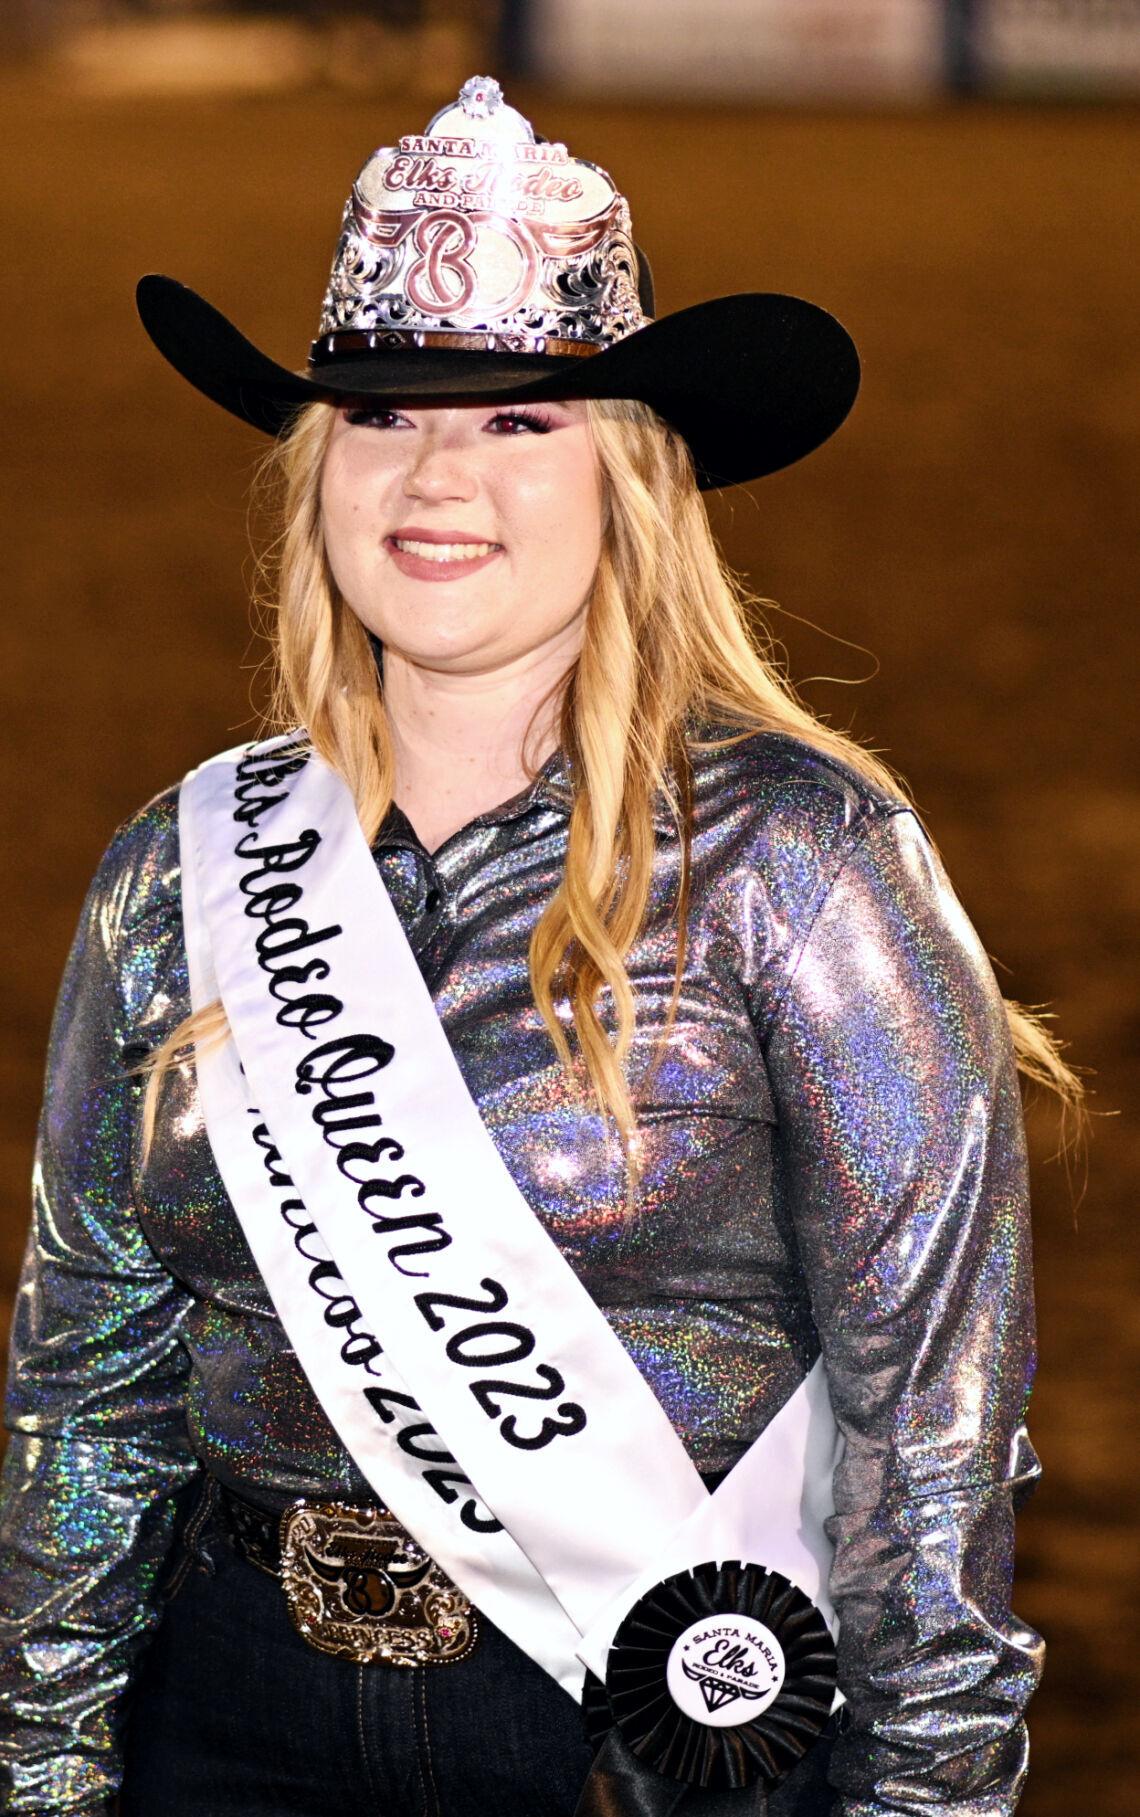 VTC Rodeo Queen – -Funds raised will support opportunities for individuals  with disabilities.